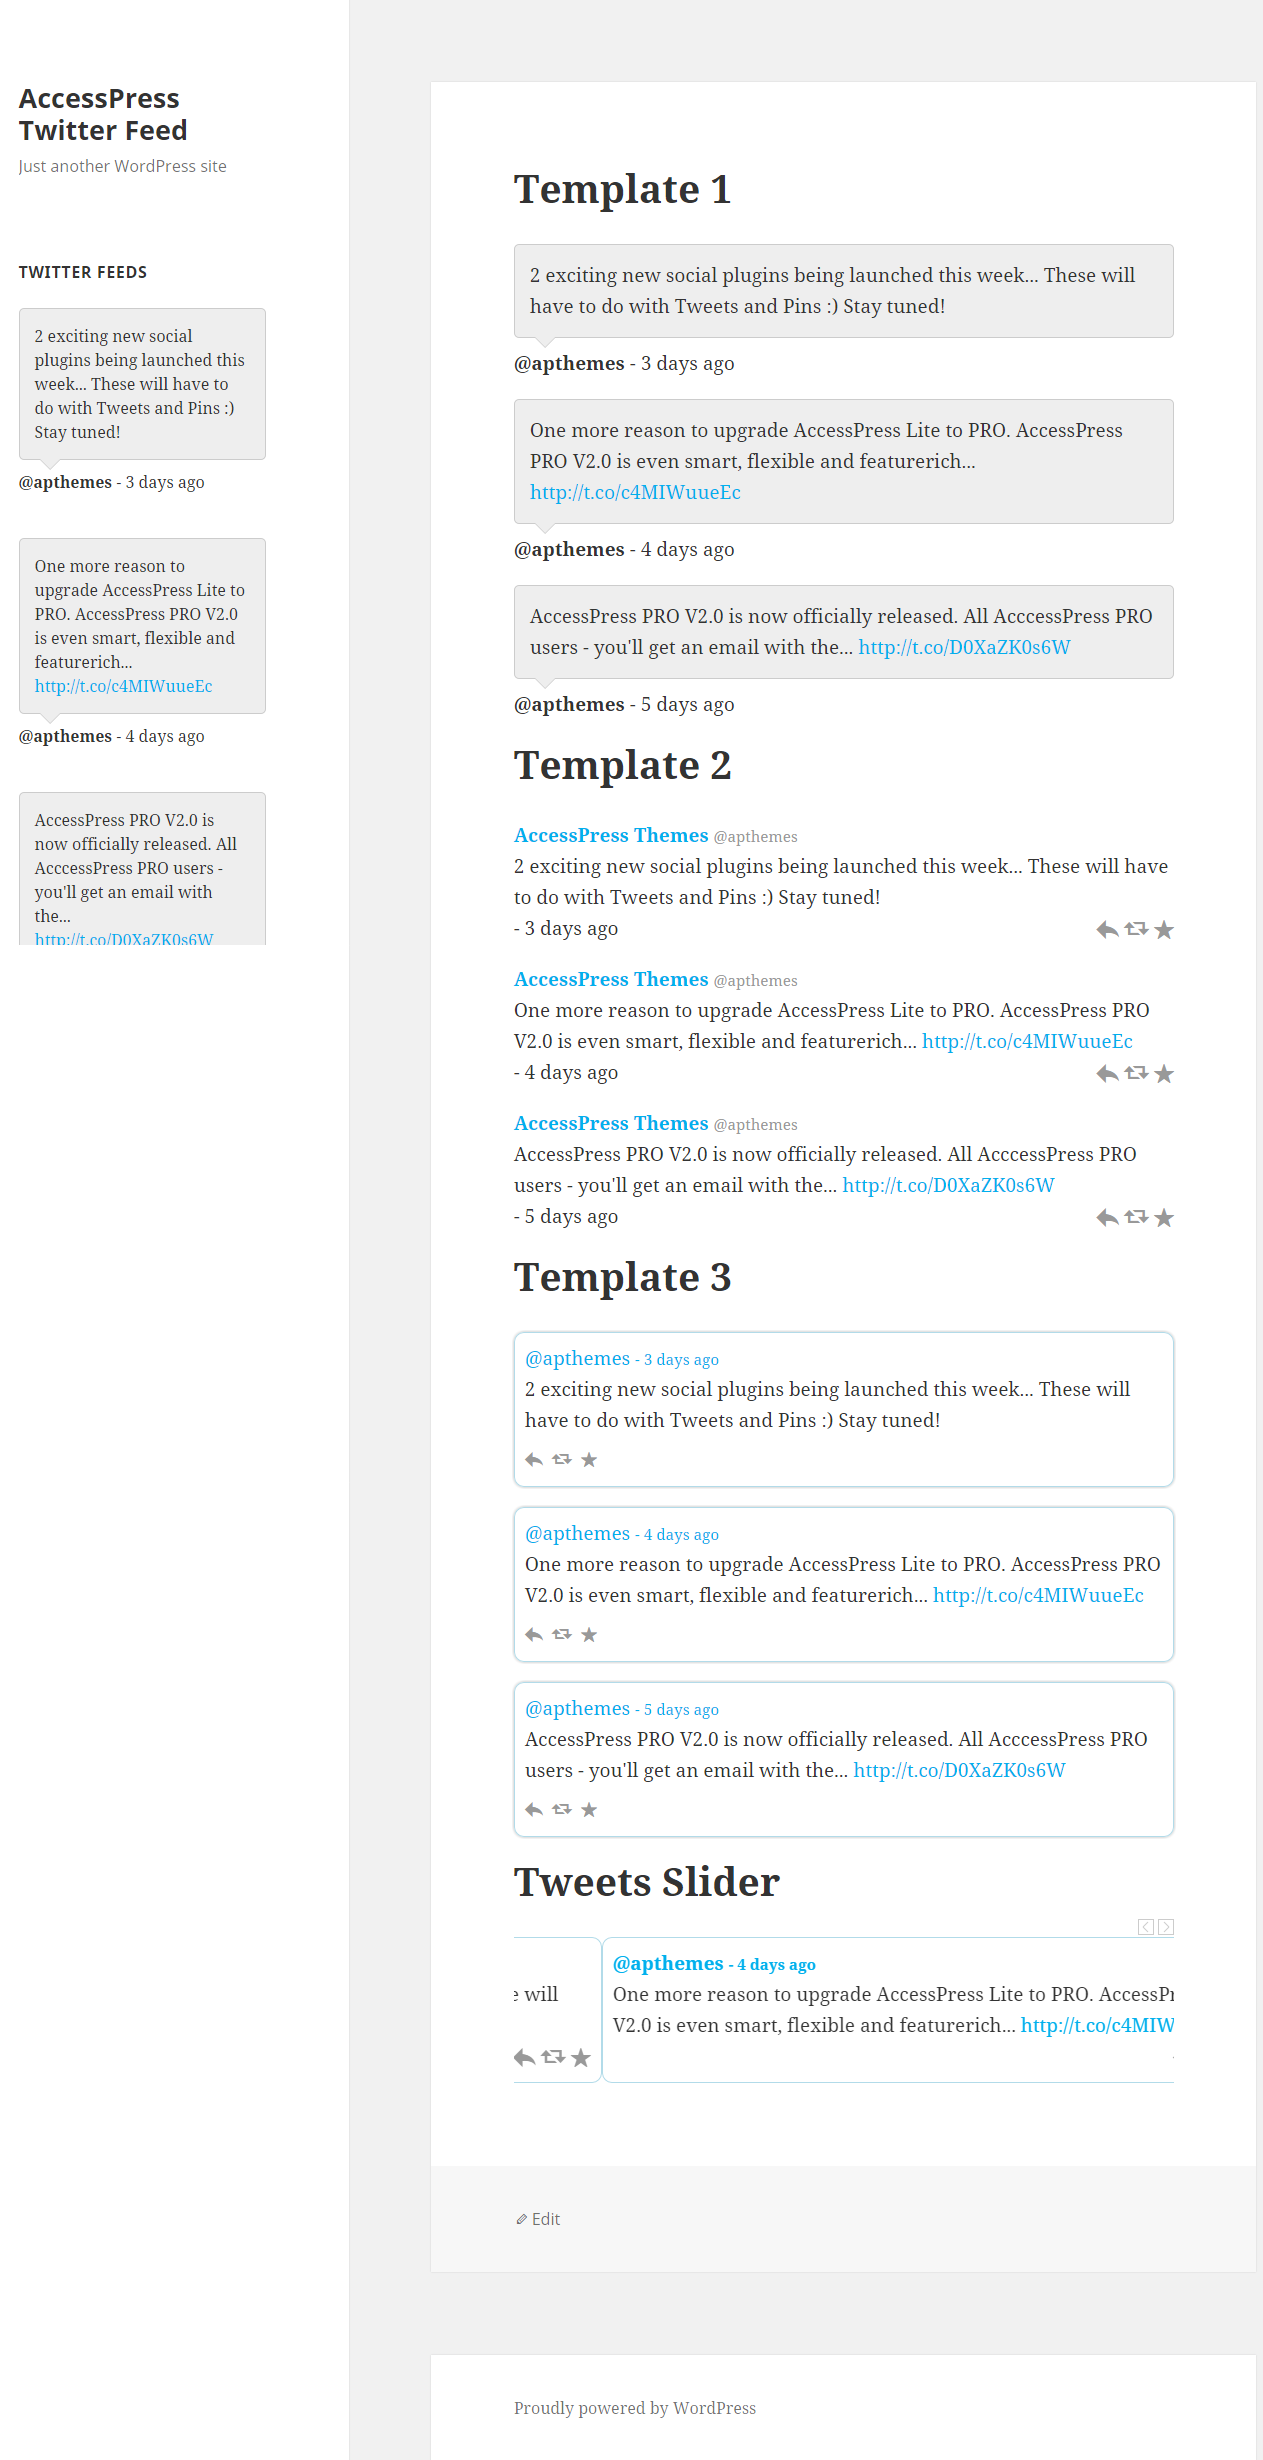 Frontend Display of Twitter Feeds